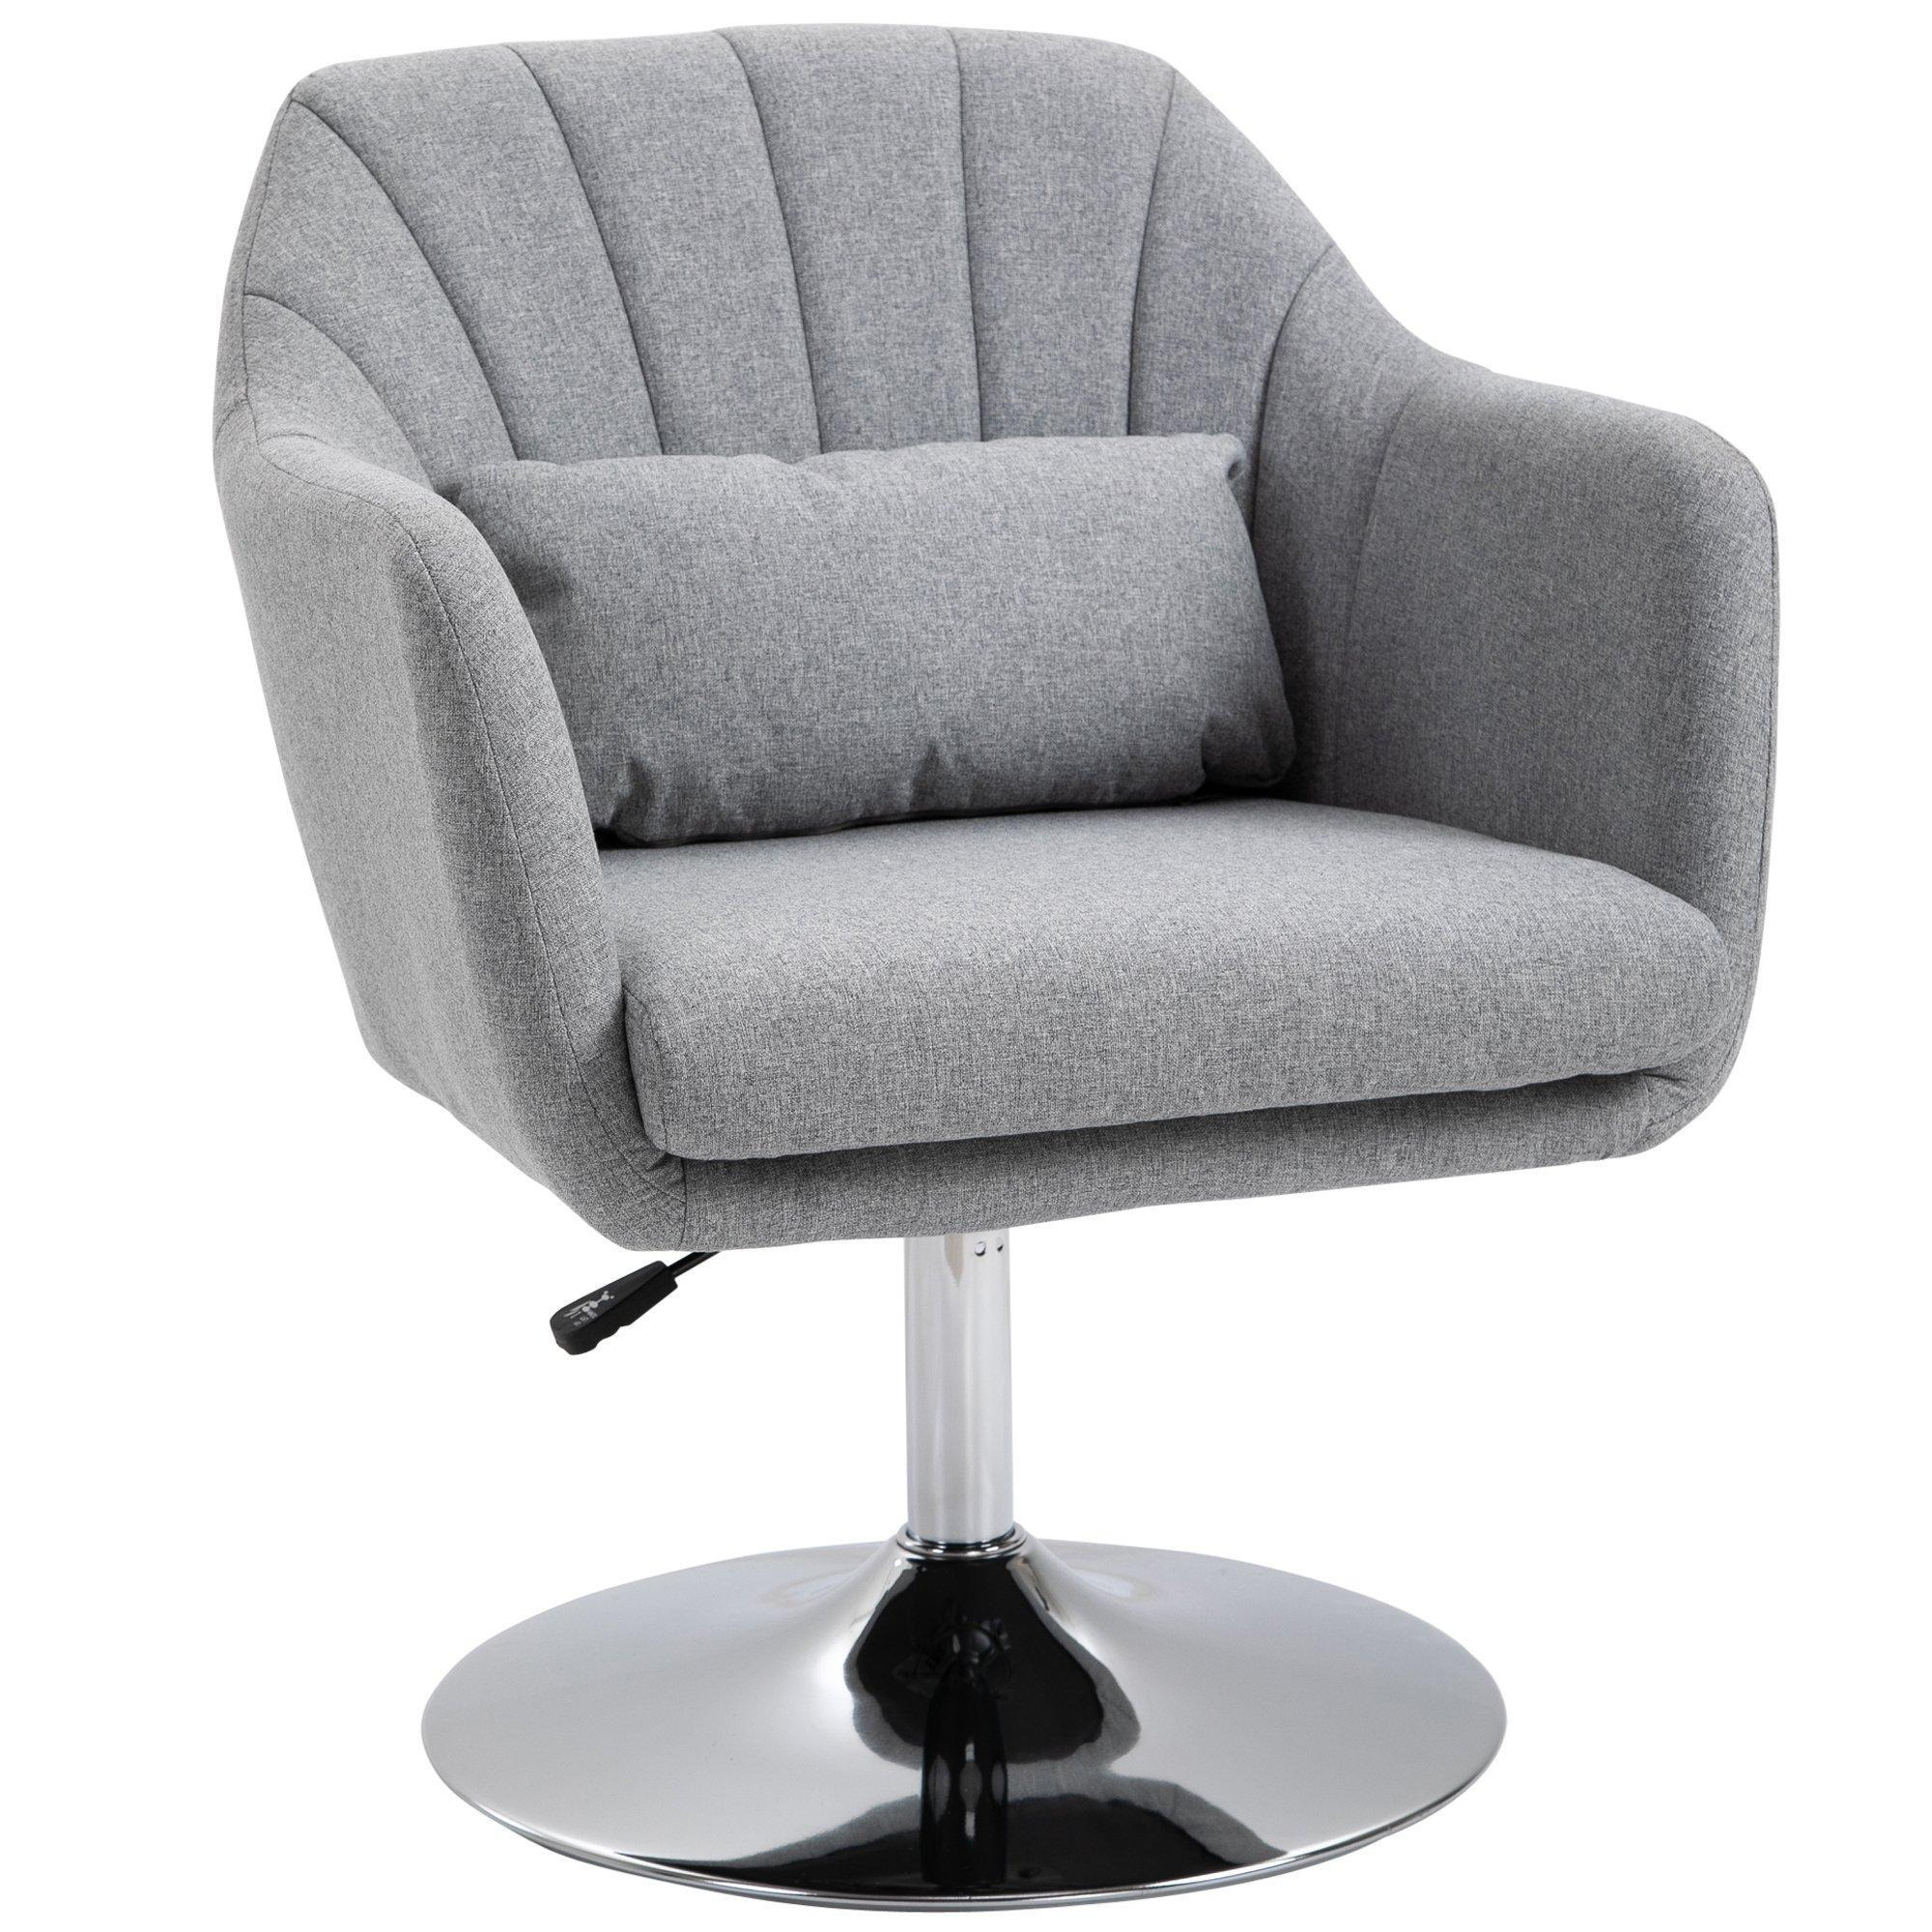 Retro Linen Swivel Tub Chair with Steel Frame Cushion Wide Seat - image 1